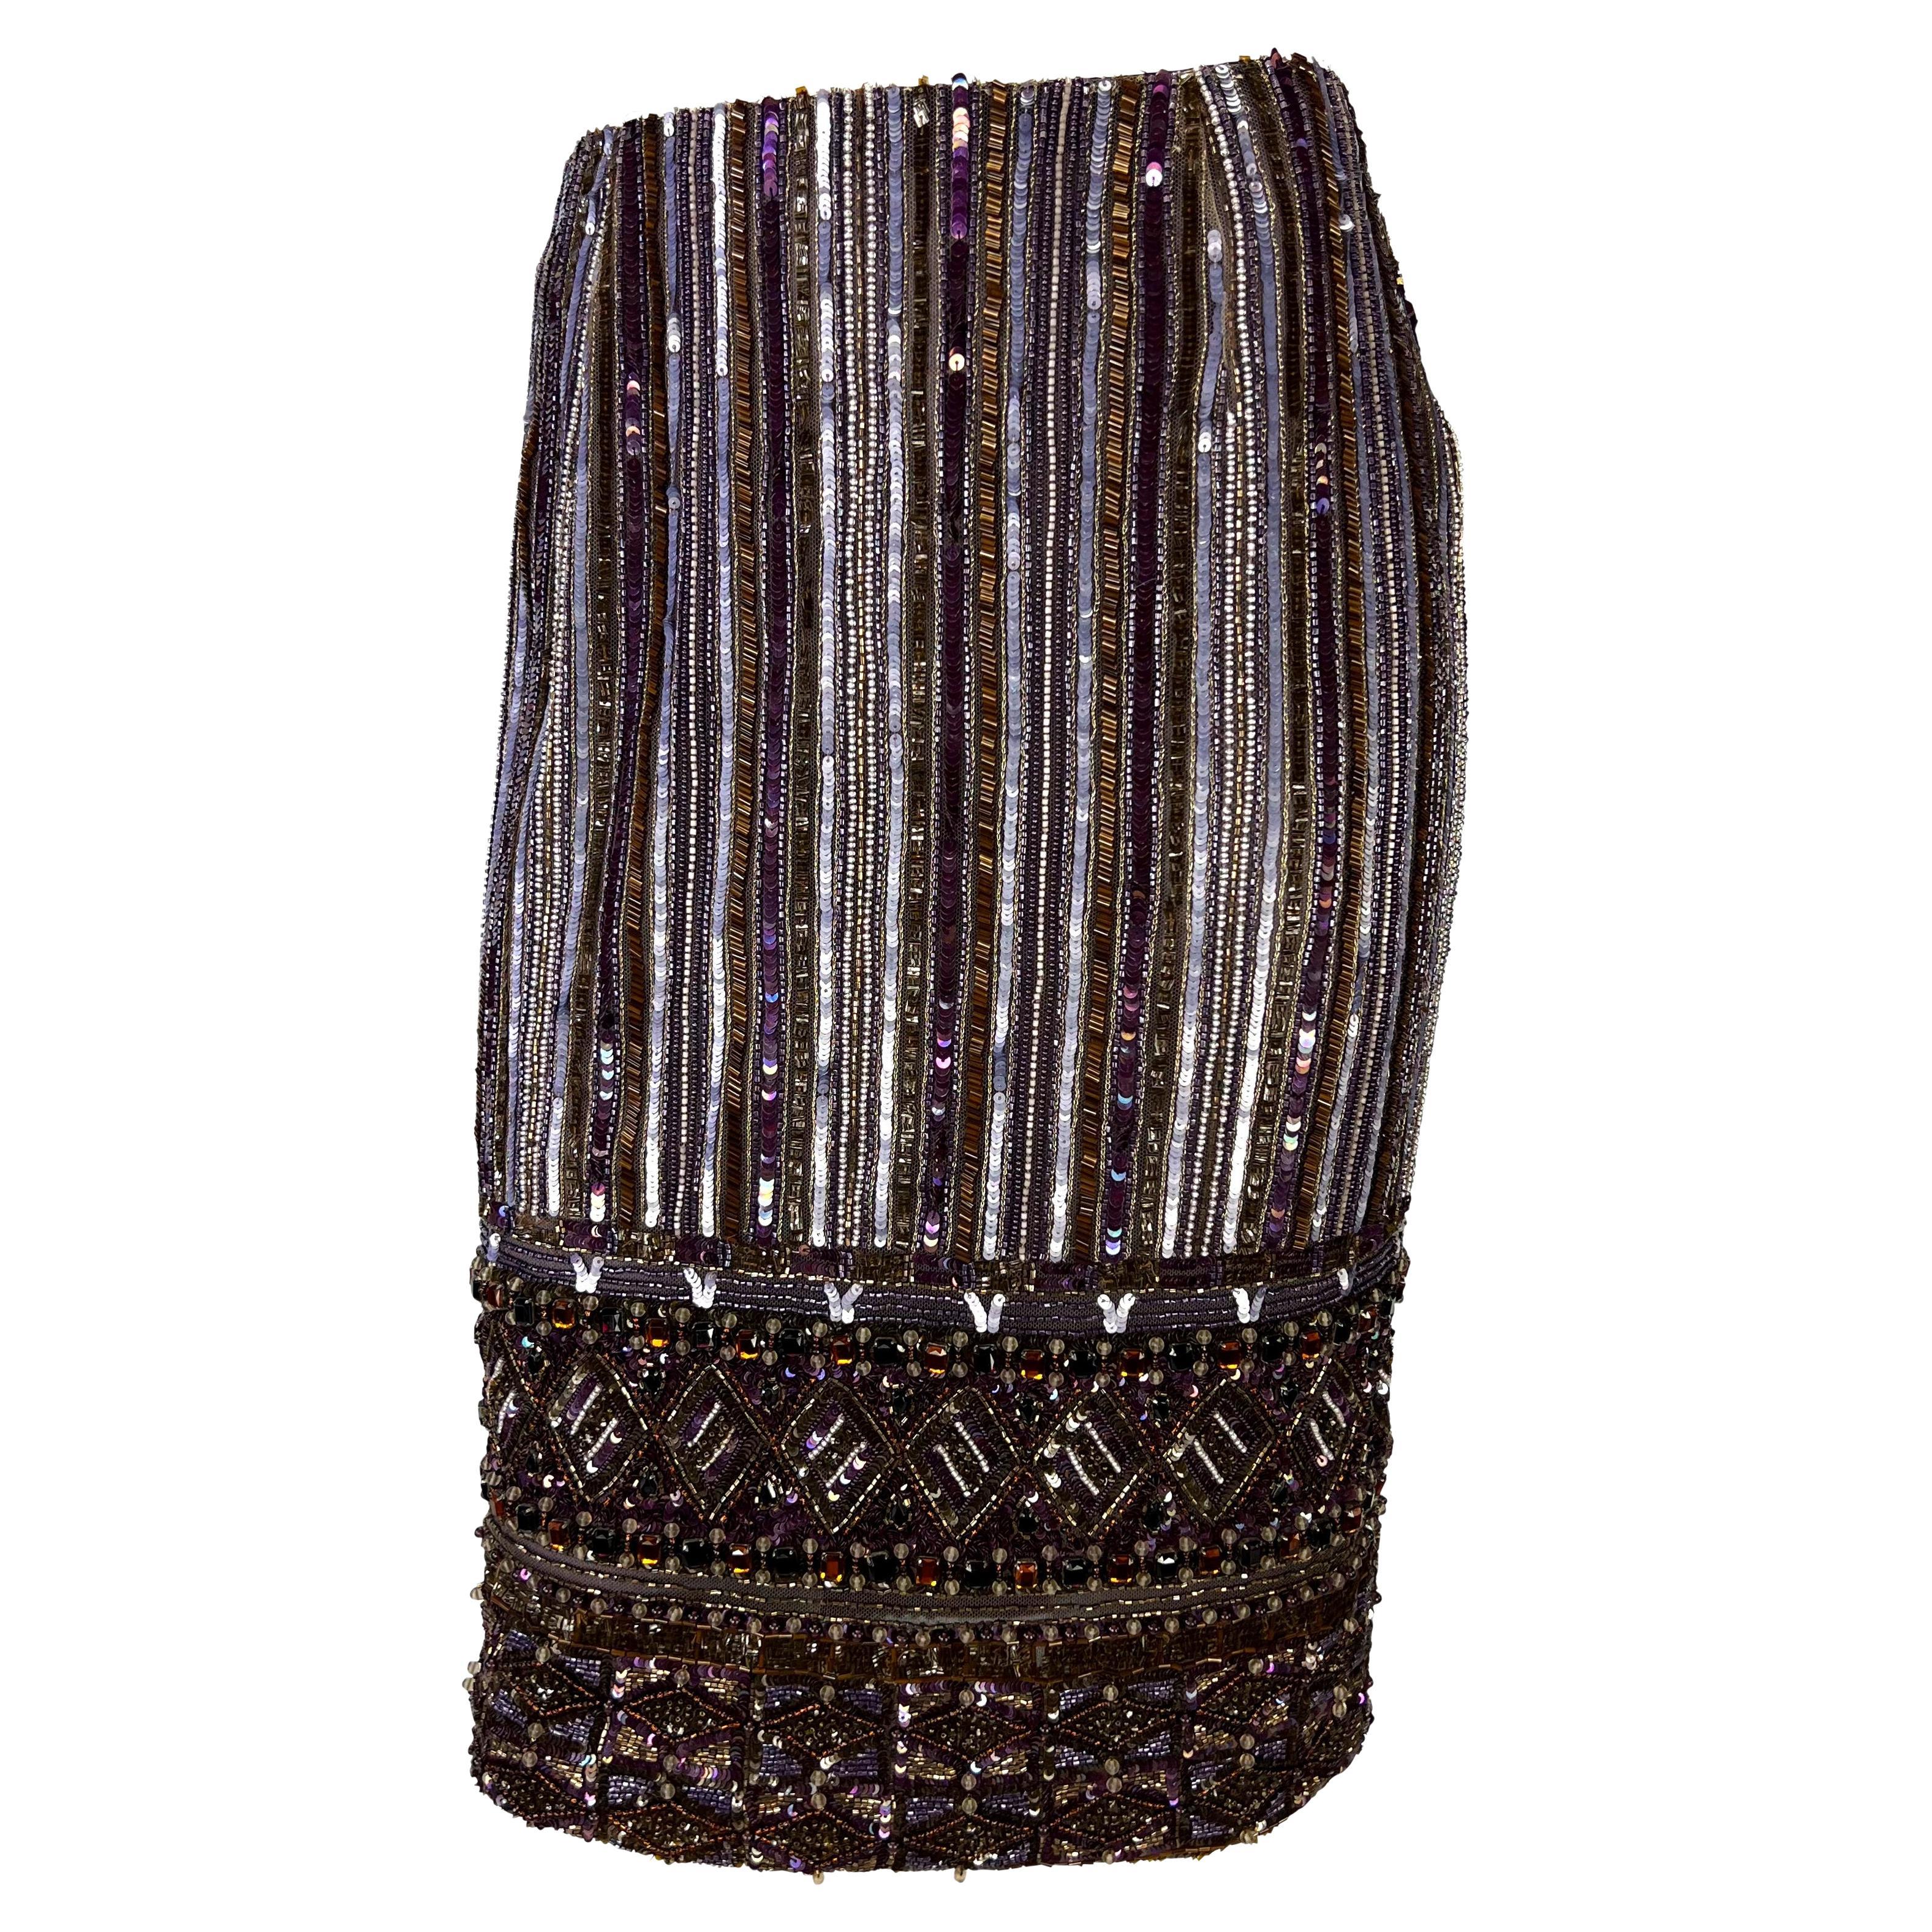 Presenting a beautiful deep purple rhinestone and beaded Valentino skirt. From the early 2000s, this intricate hand-beaded skirt is covered in thousands of beads and rhinestones. The skirt features a vertical stripe pattern around the rear with a